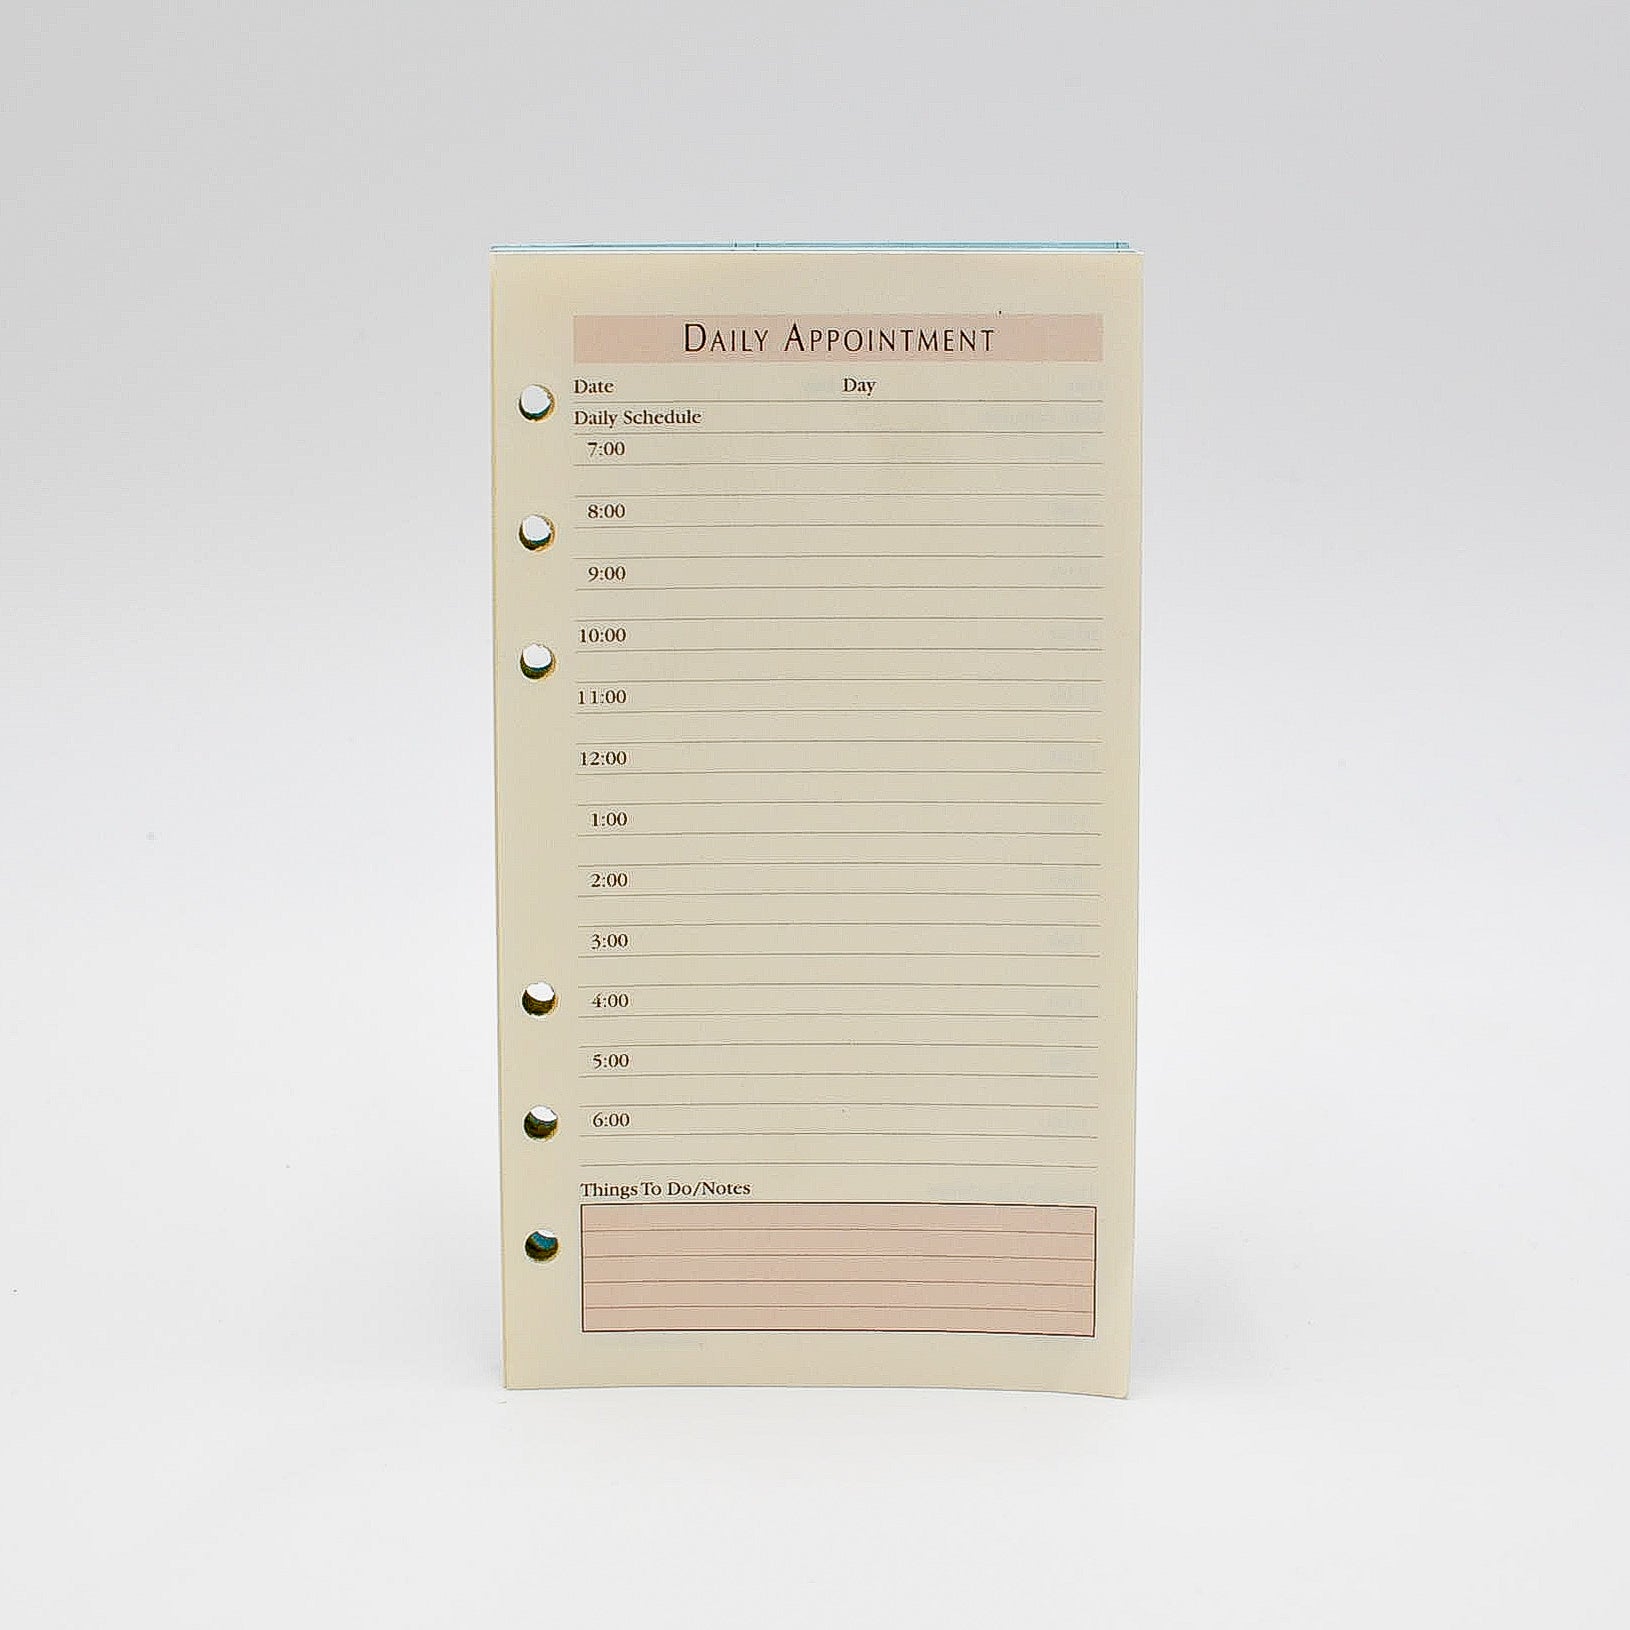 Daily Appointment Sheets: PC64AP6I 6-3/4" X 3-3/4" 6-Ring Loose Leaf Ruled Refill preference collection sungraphix paper organizer ivory Louis Vuitton 